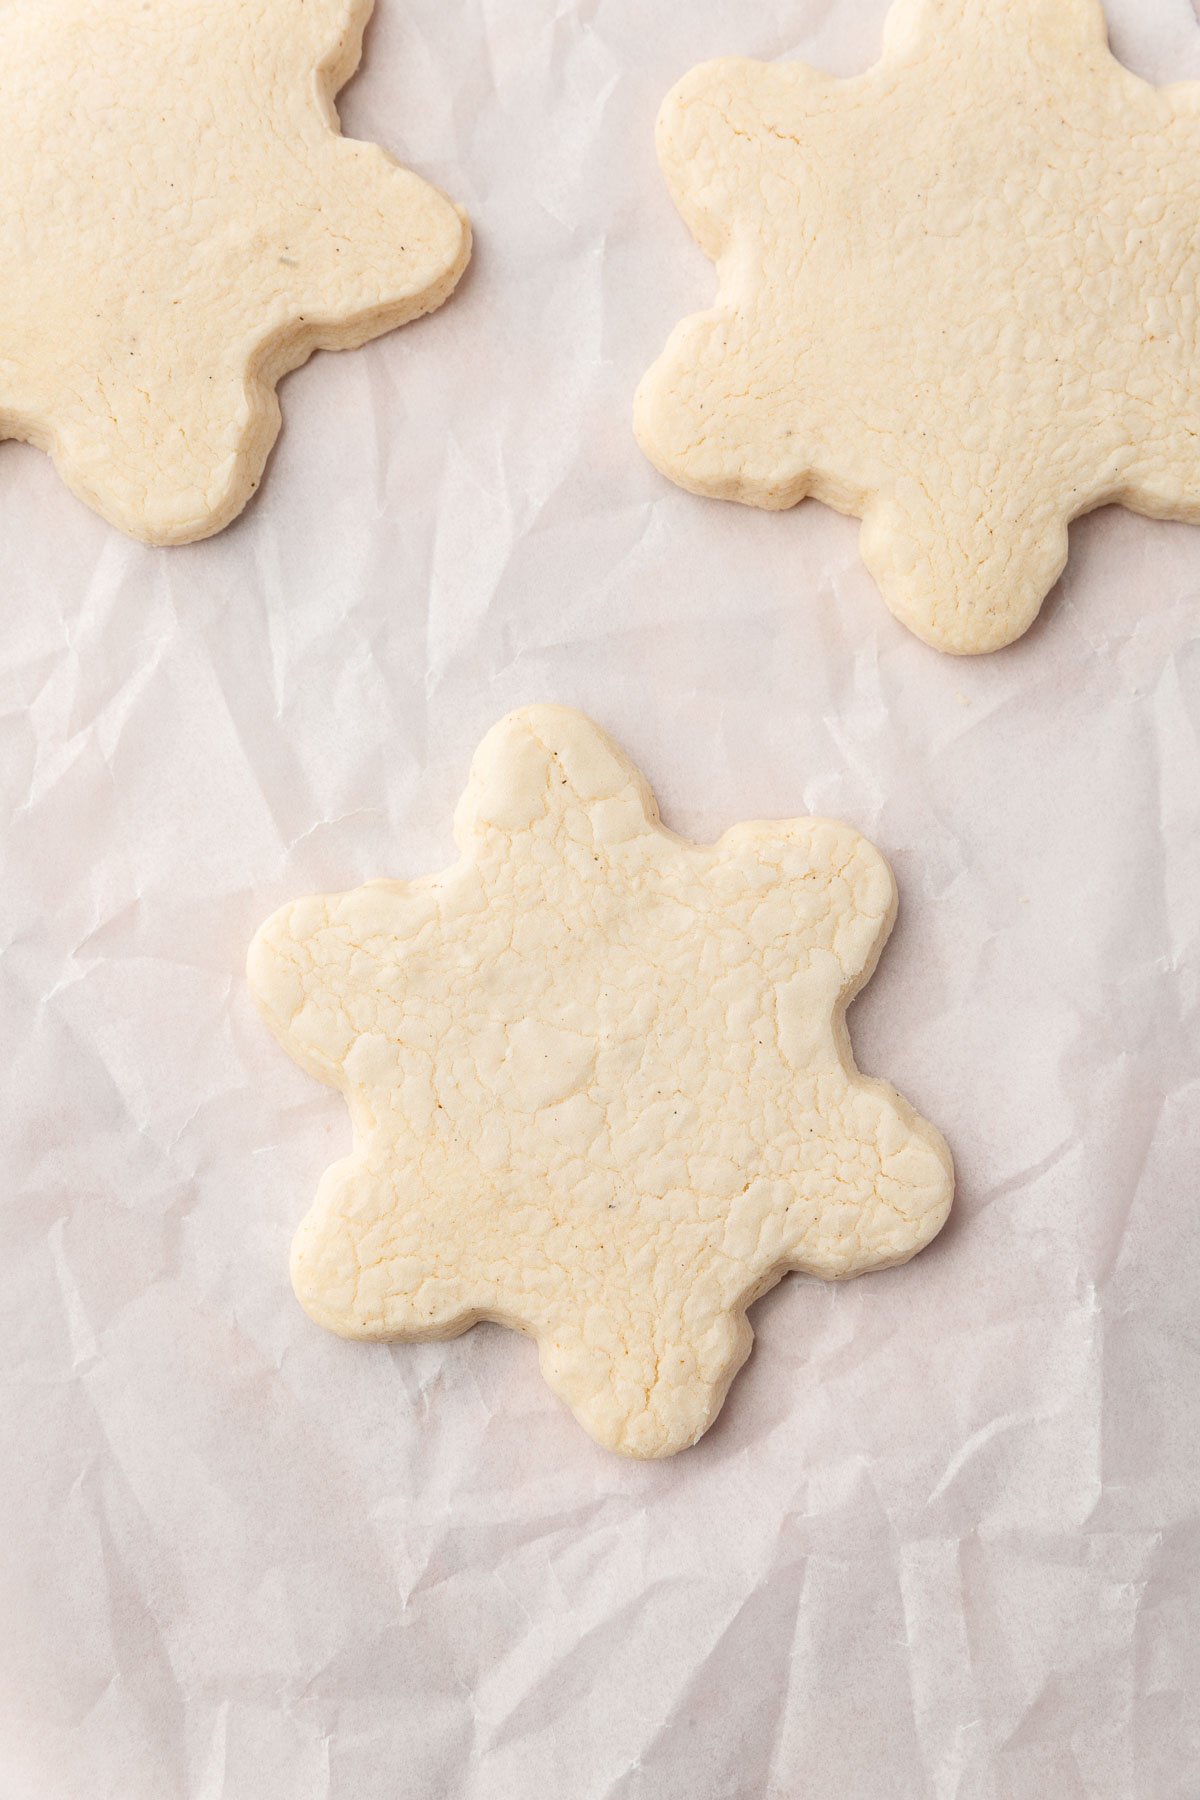 Three gluten-free snowflake cookies on a piece of parchment paper.